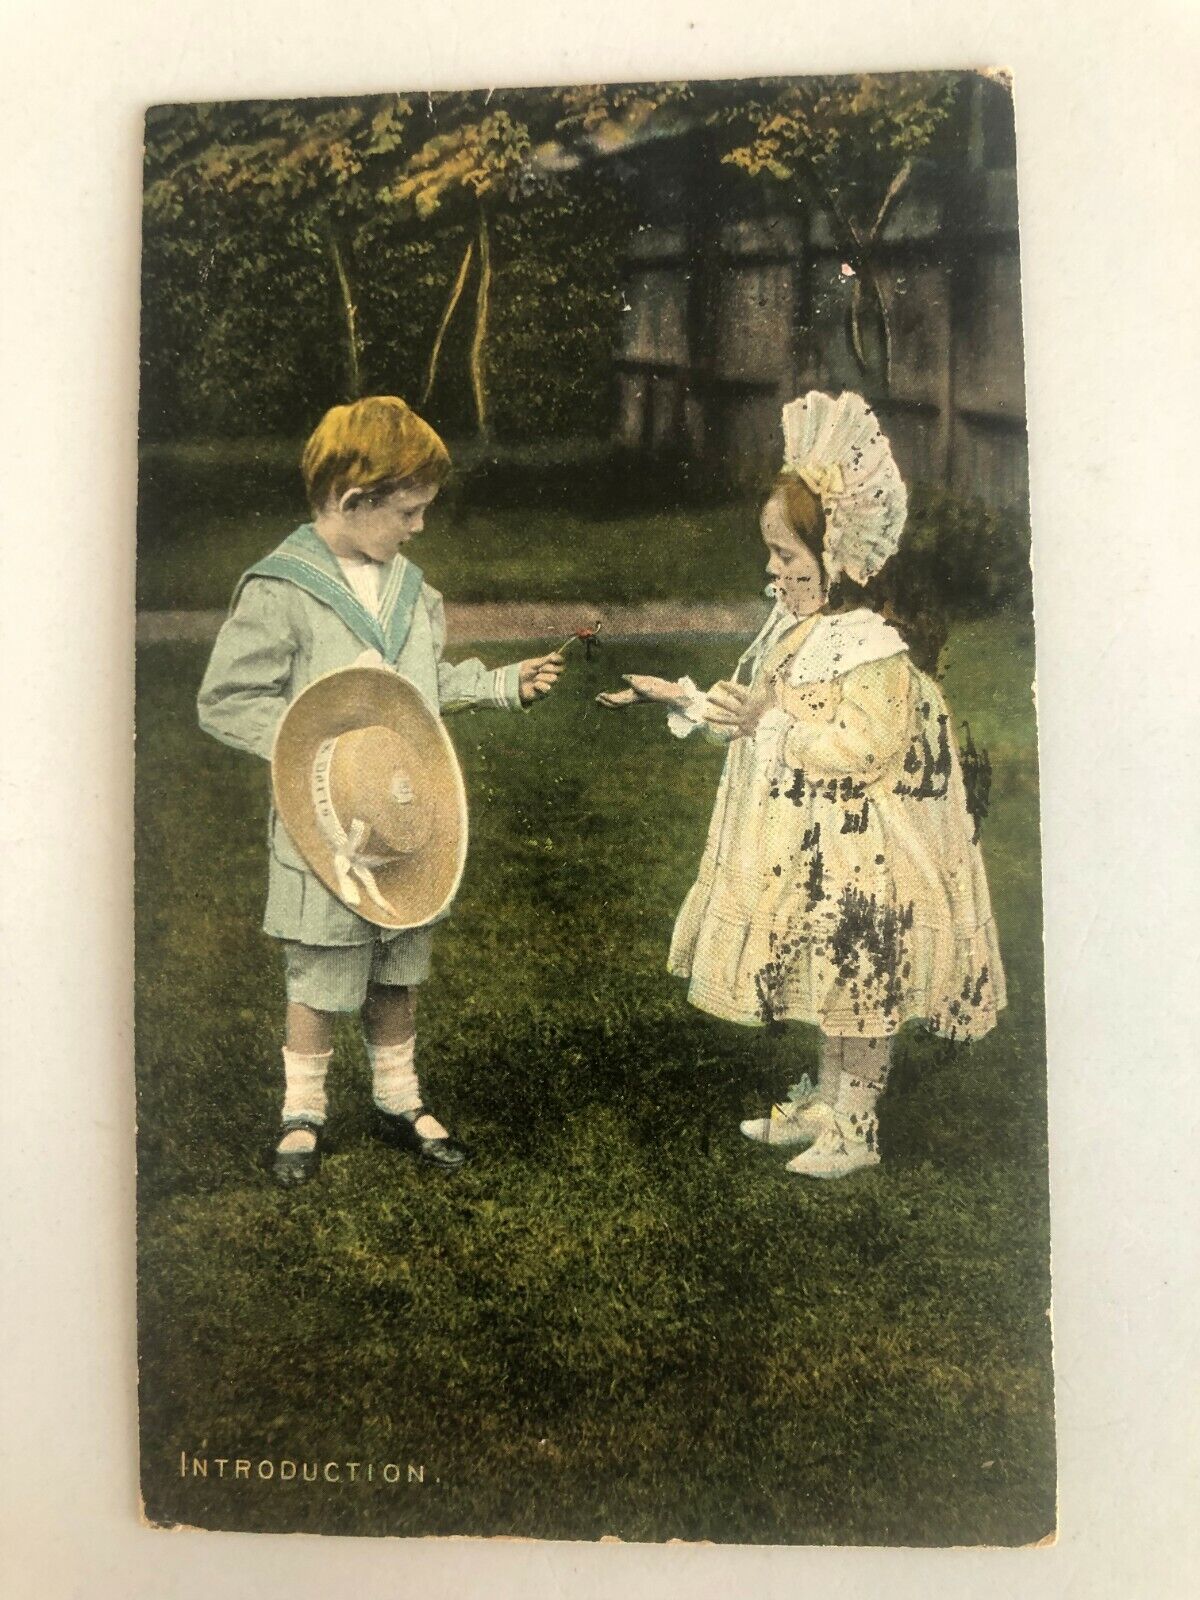 Vintage 1908 Young Boy handing Young Girl a Flower, Millar & Lang, Introduction